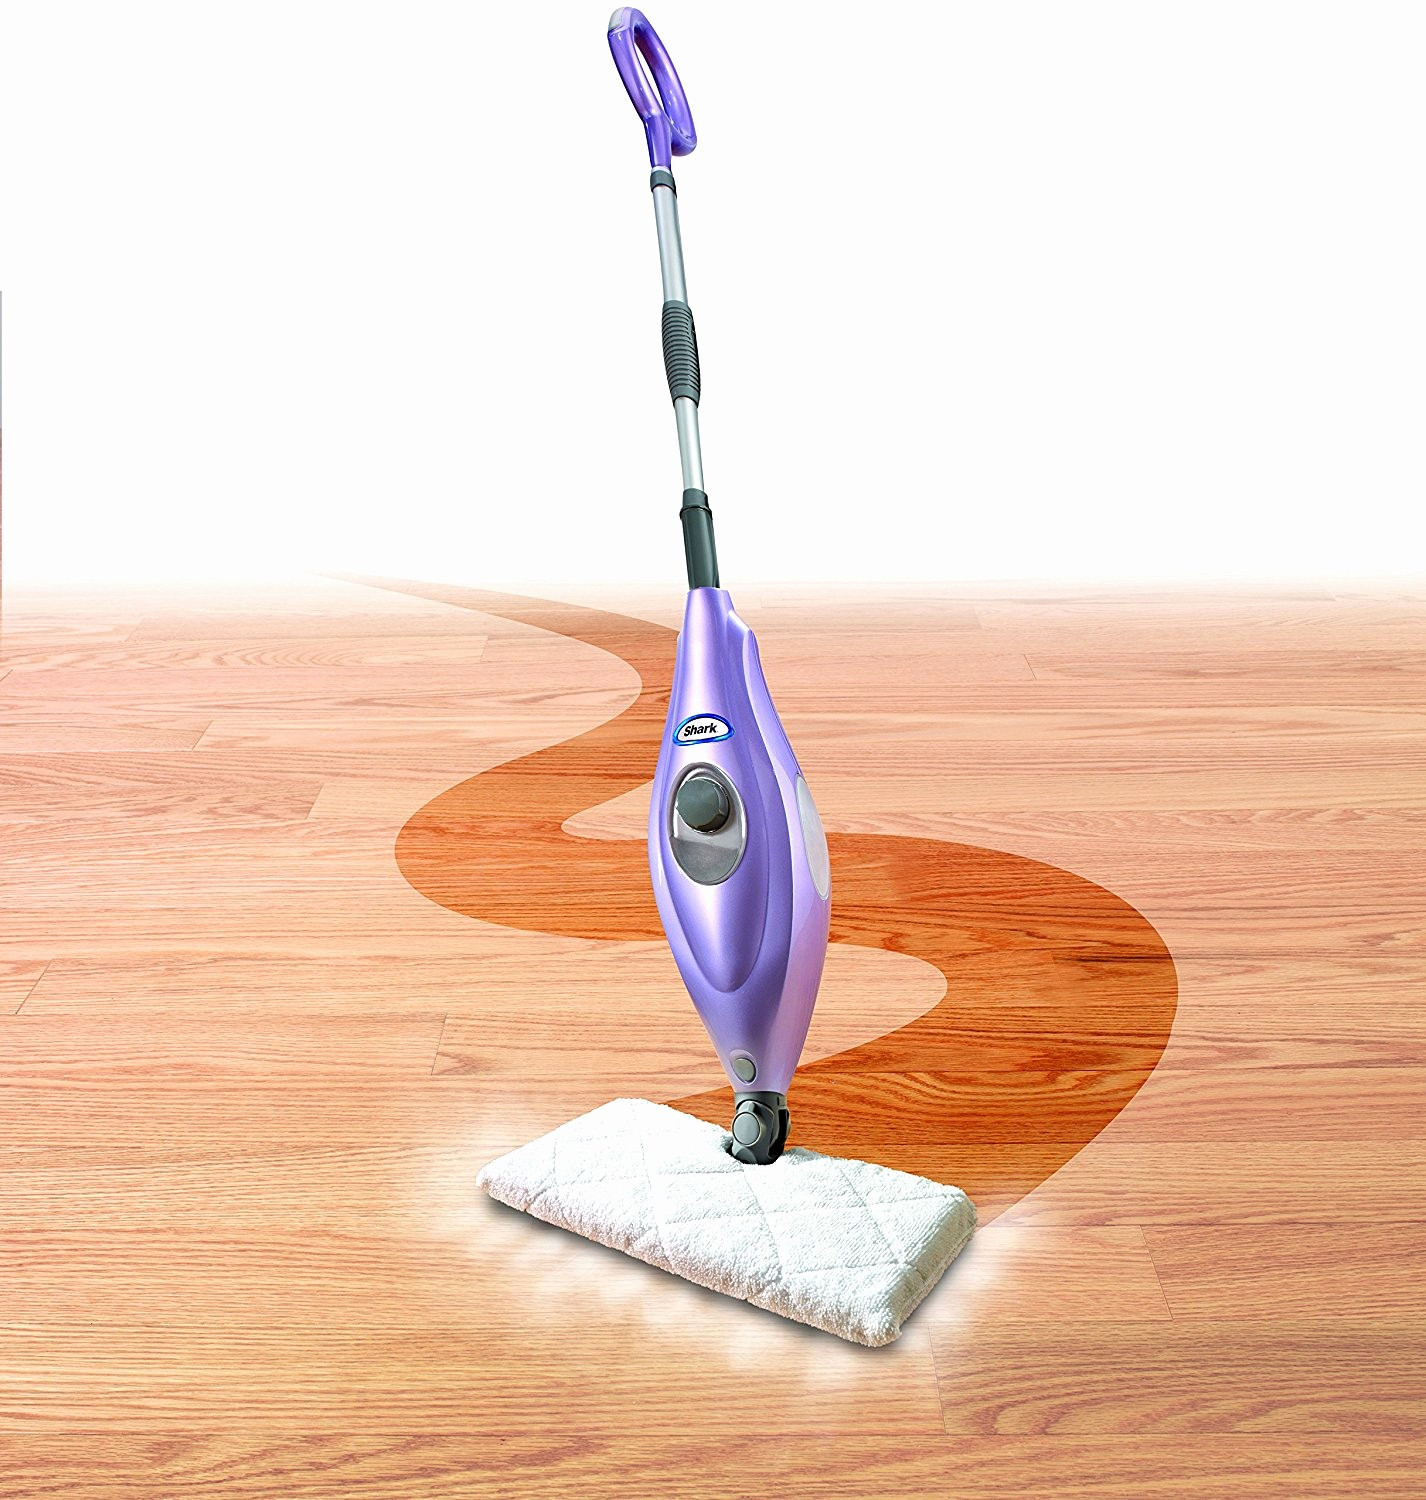 17 Nice How to Use Bona Hardwood Floor Cleaner 2024 free download how to use bona hardwood floor cleaner of 19 awesome steam clean hardwood floors images dizpos com throughout steam clean hardwood floors inspirational 50 luxury bona hardwood floor graphics